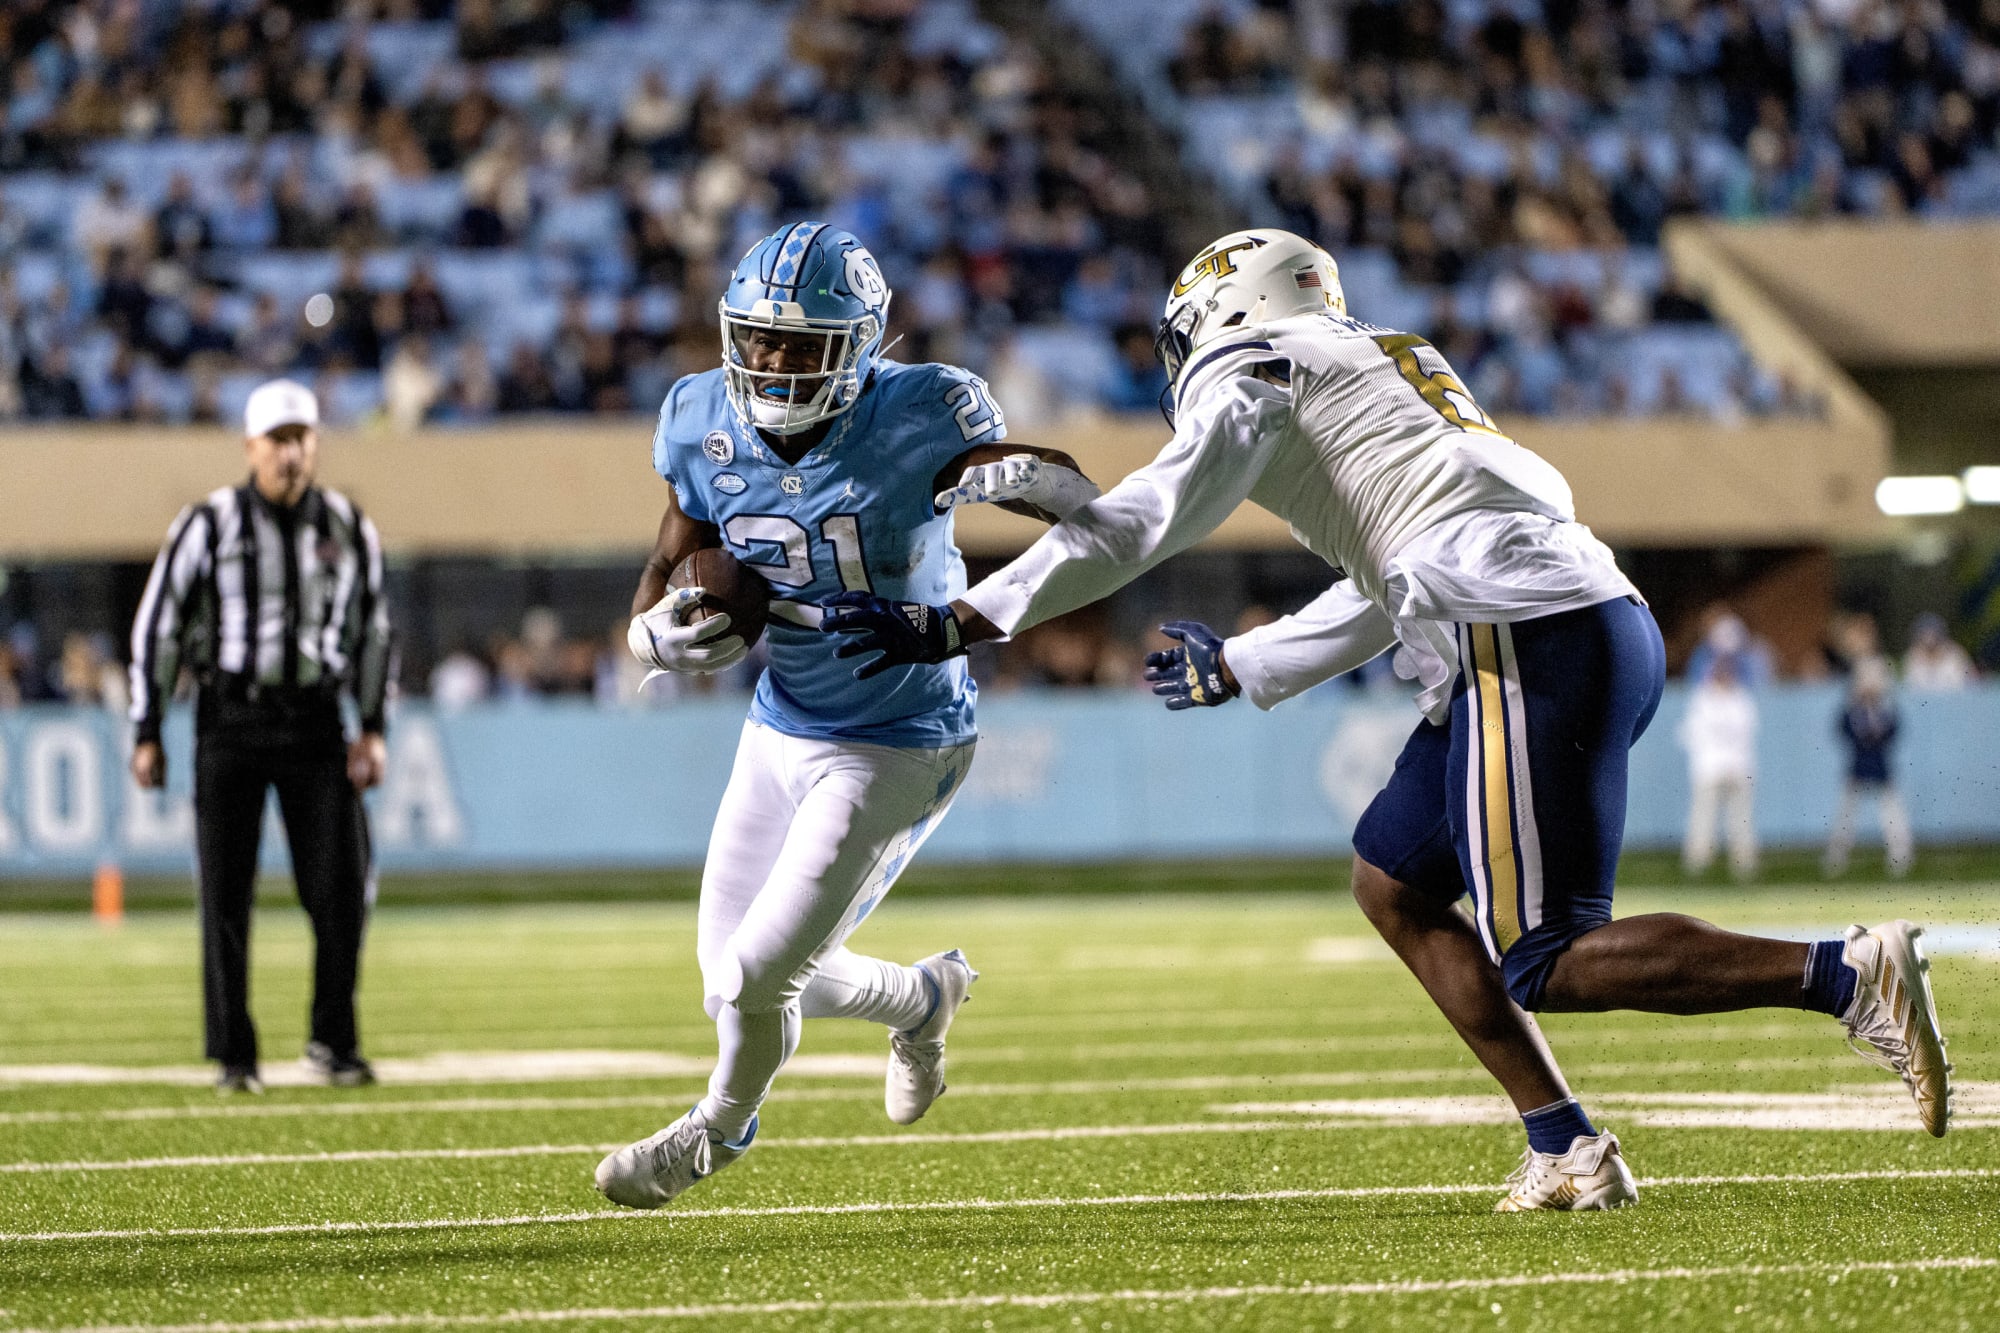 UNC Football vs. NC State: Preview, info, prediction and more